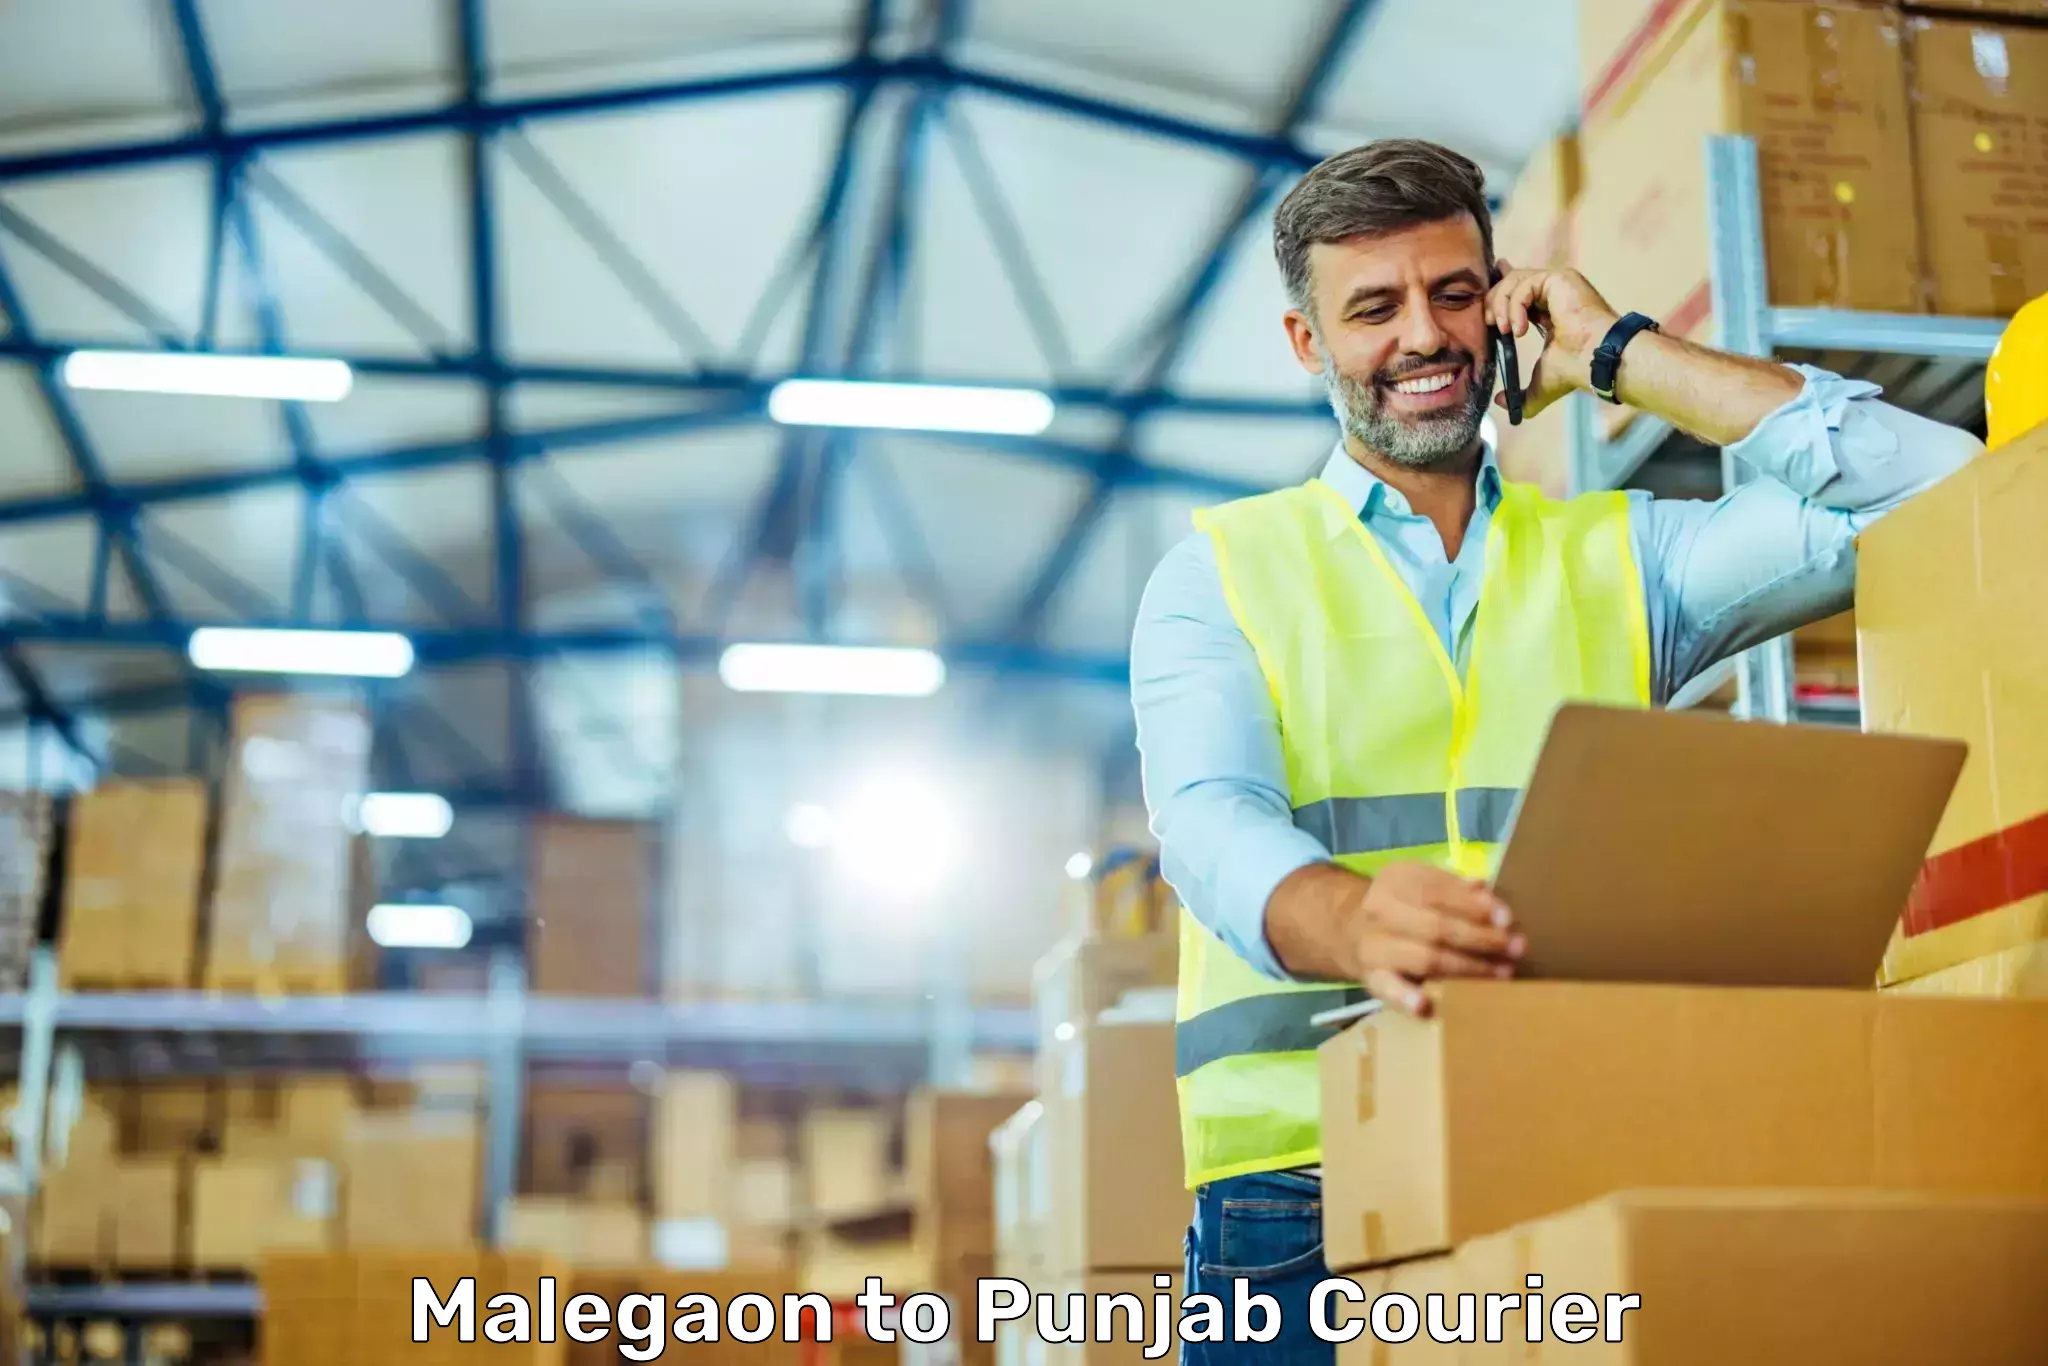 Urban courier service Malegaon to Punjab Agricultural University Ludhiana